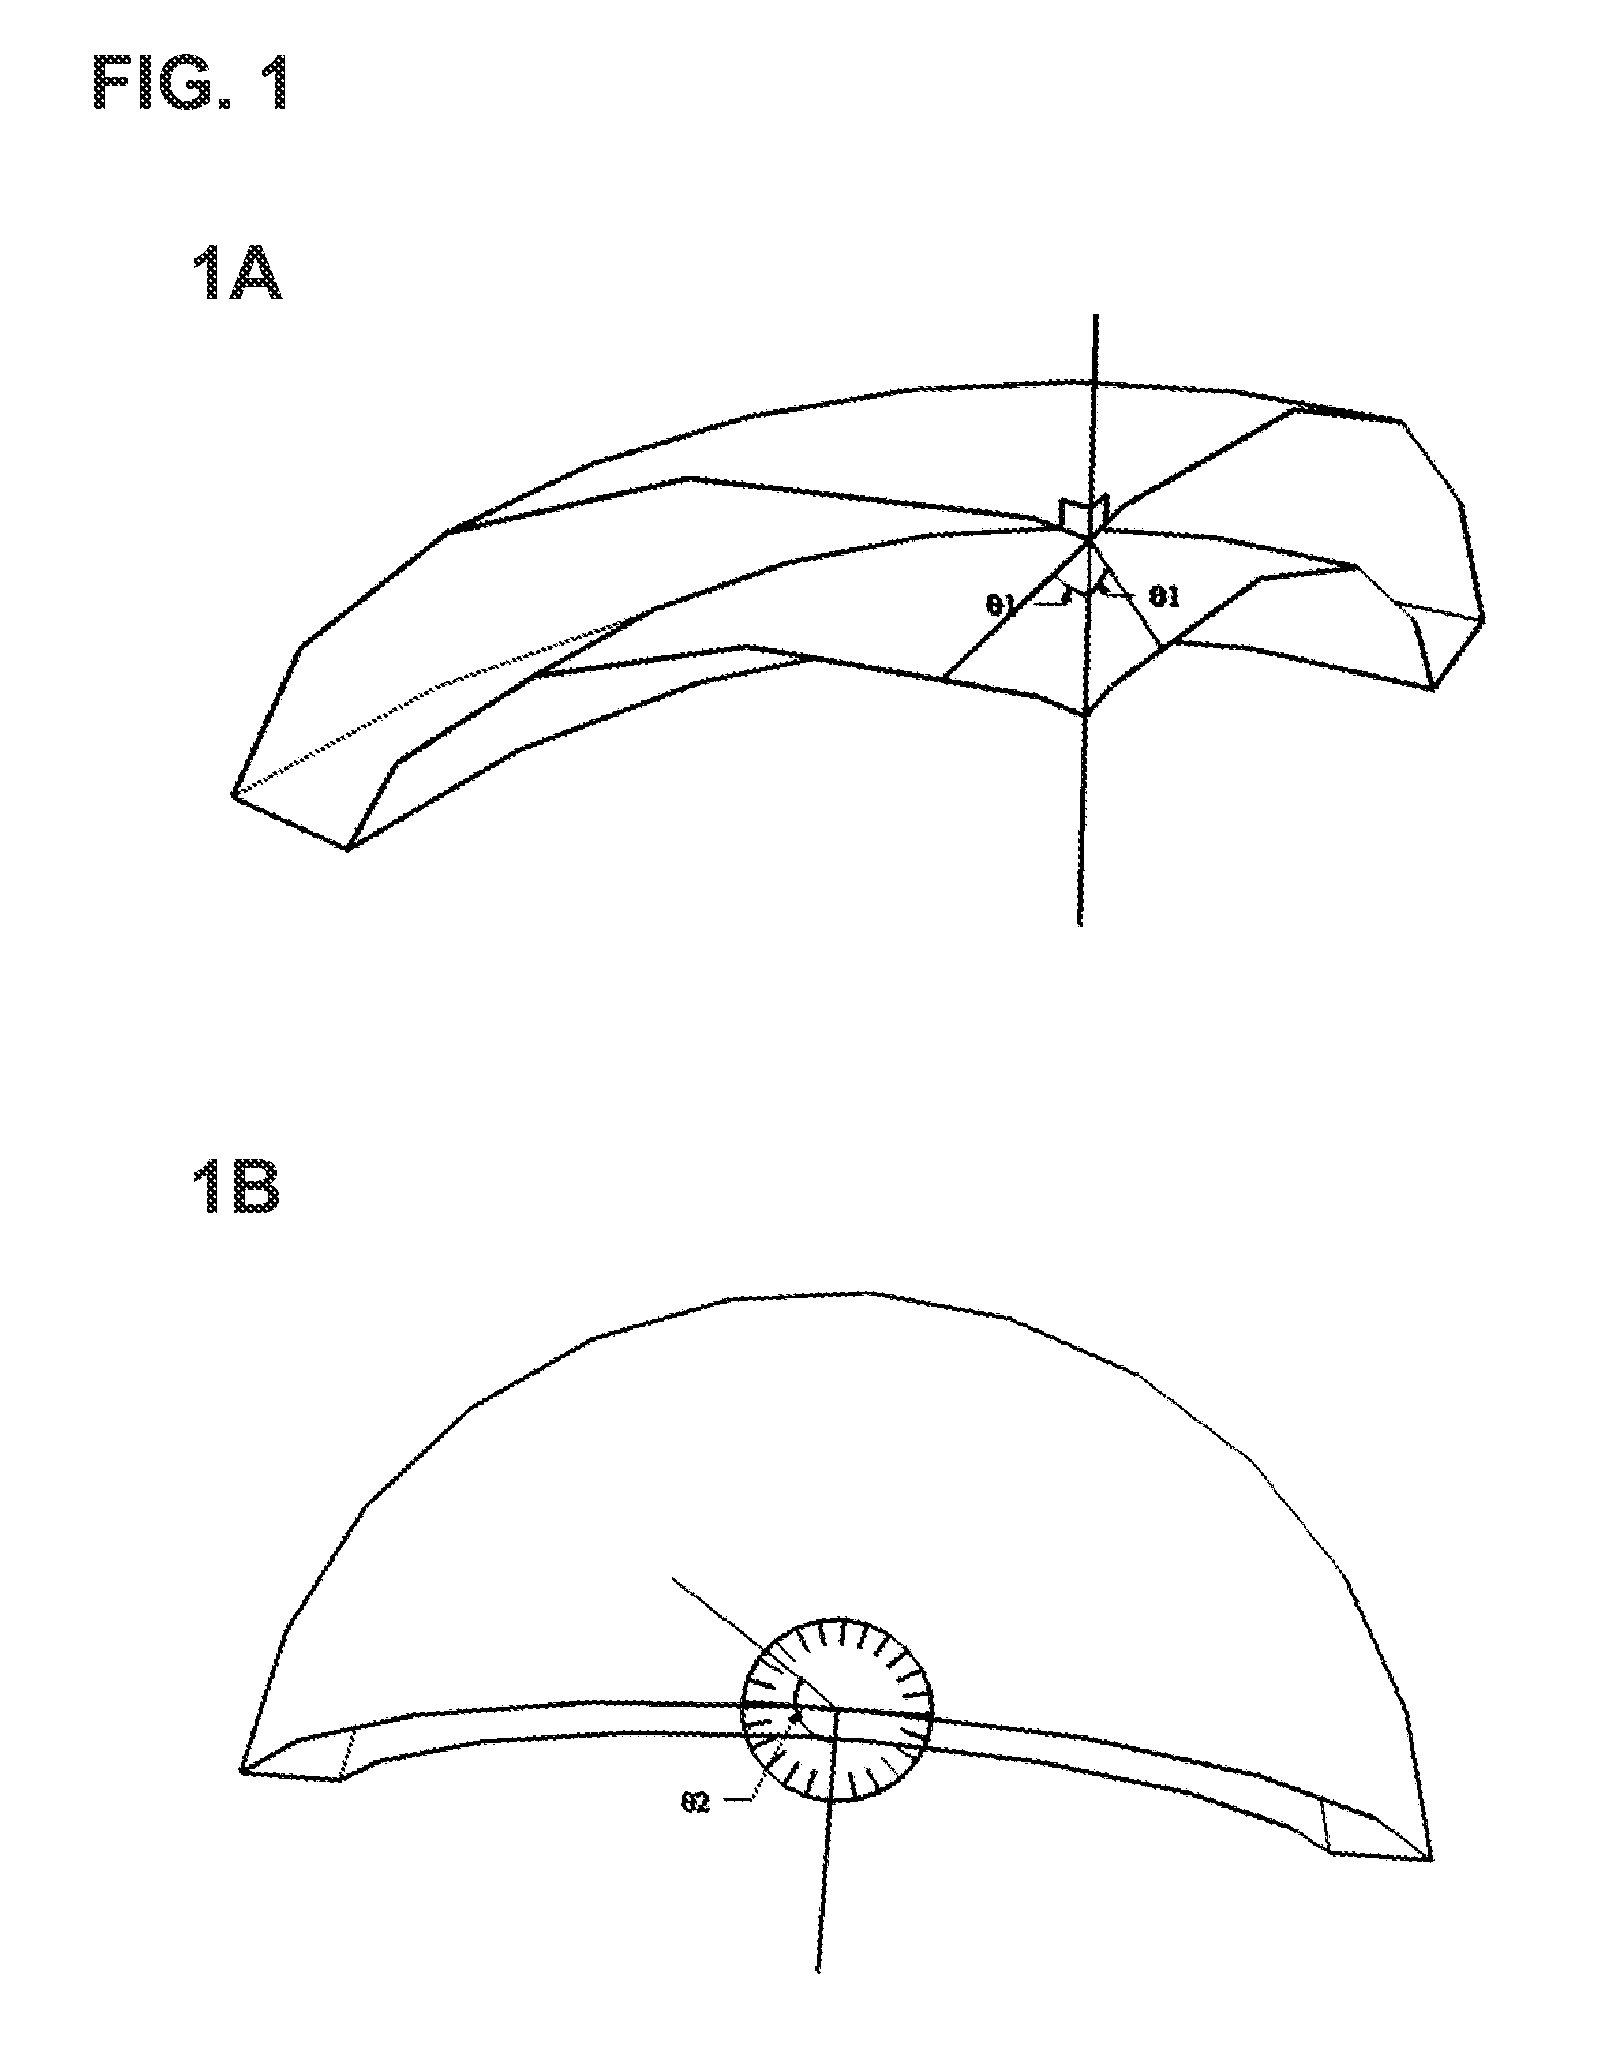 Insertion of medical devices through non-orthogonal and orthogonal trajectories within the cranium and methods of using